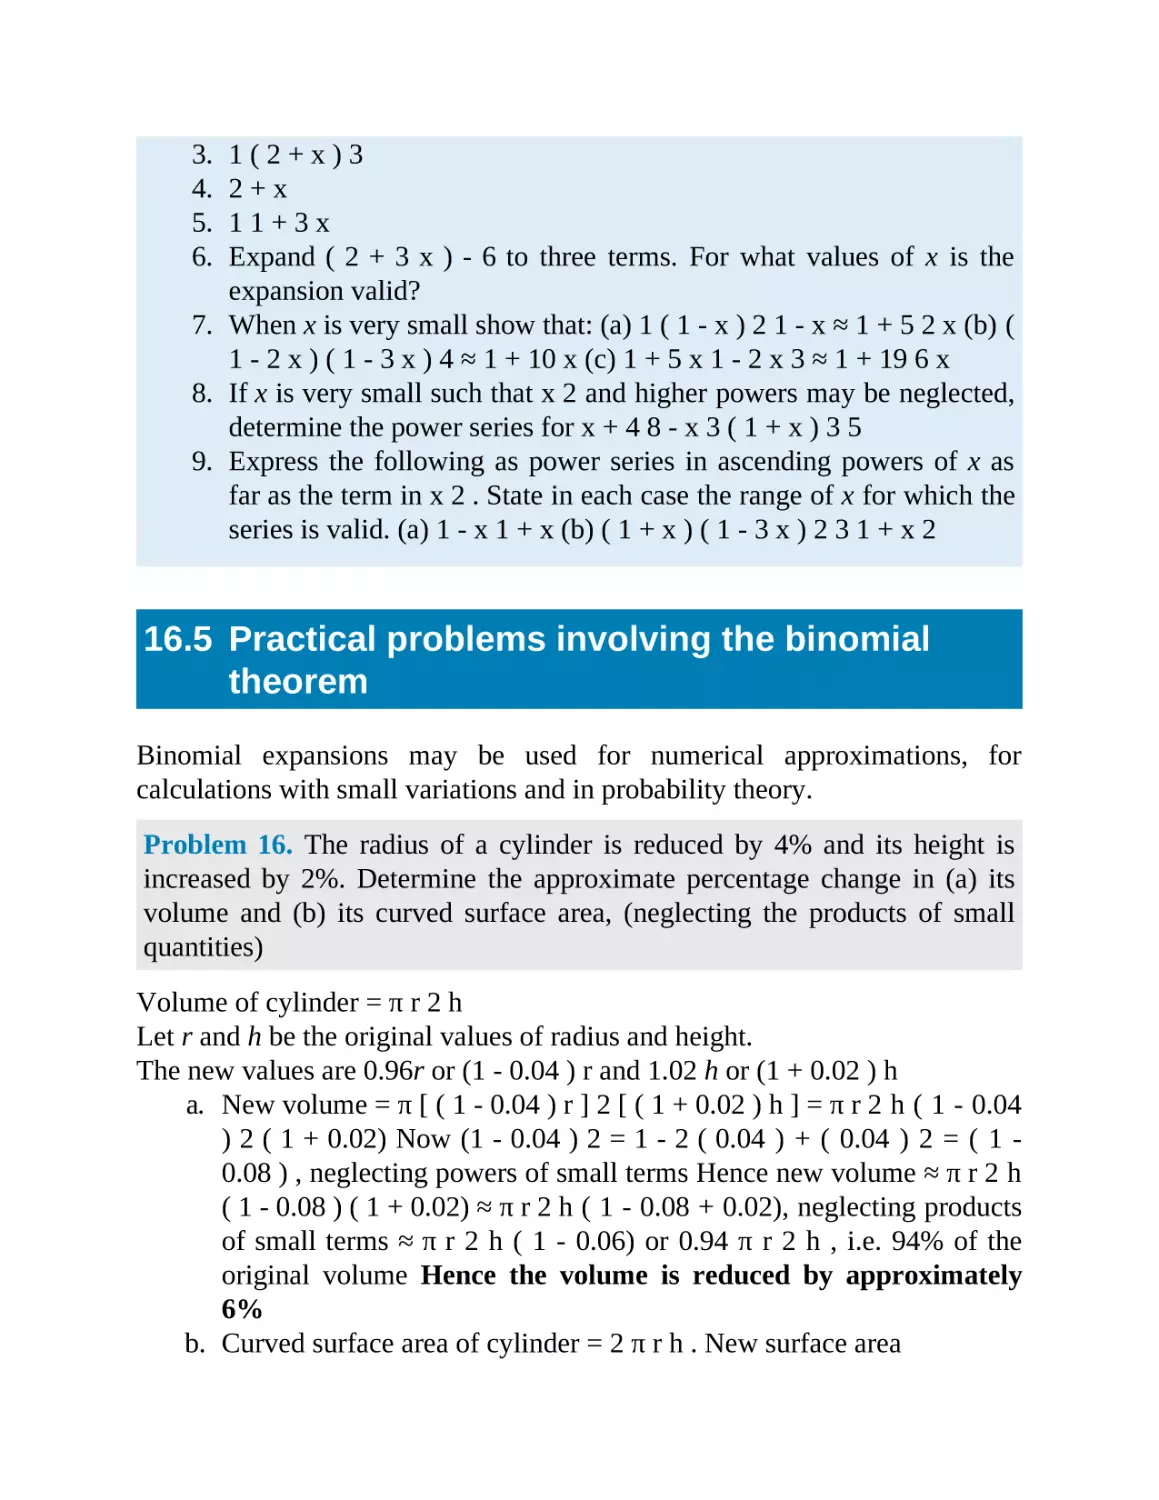 16.5 Practical problems involving the binomial theorem